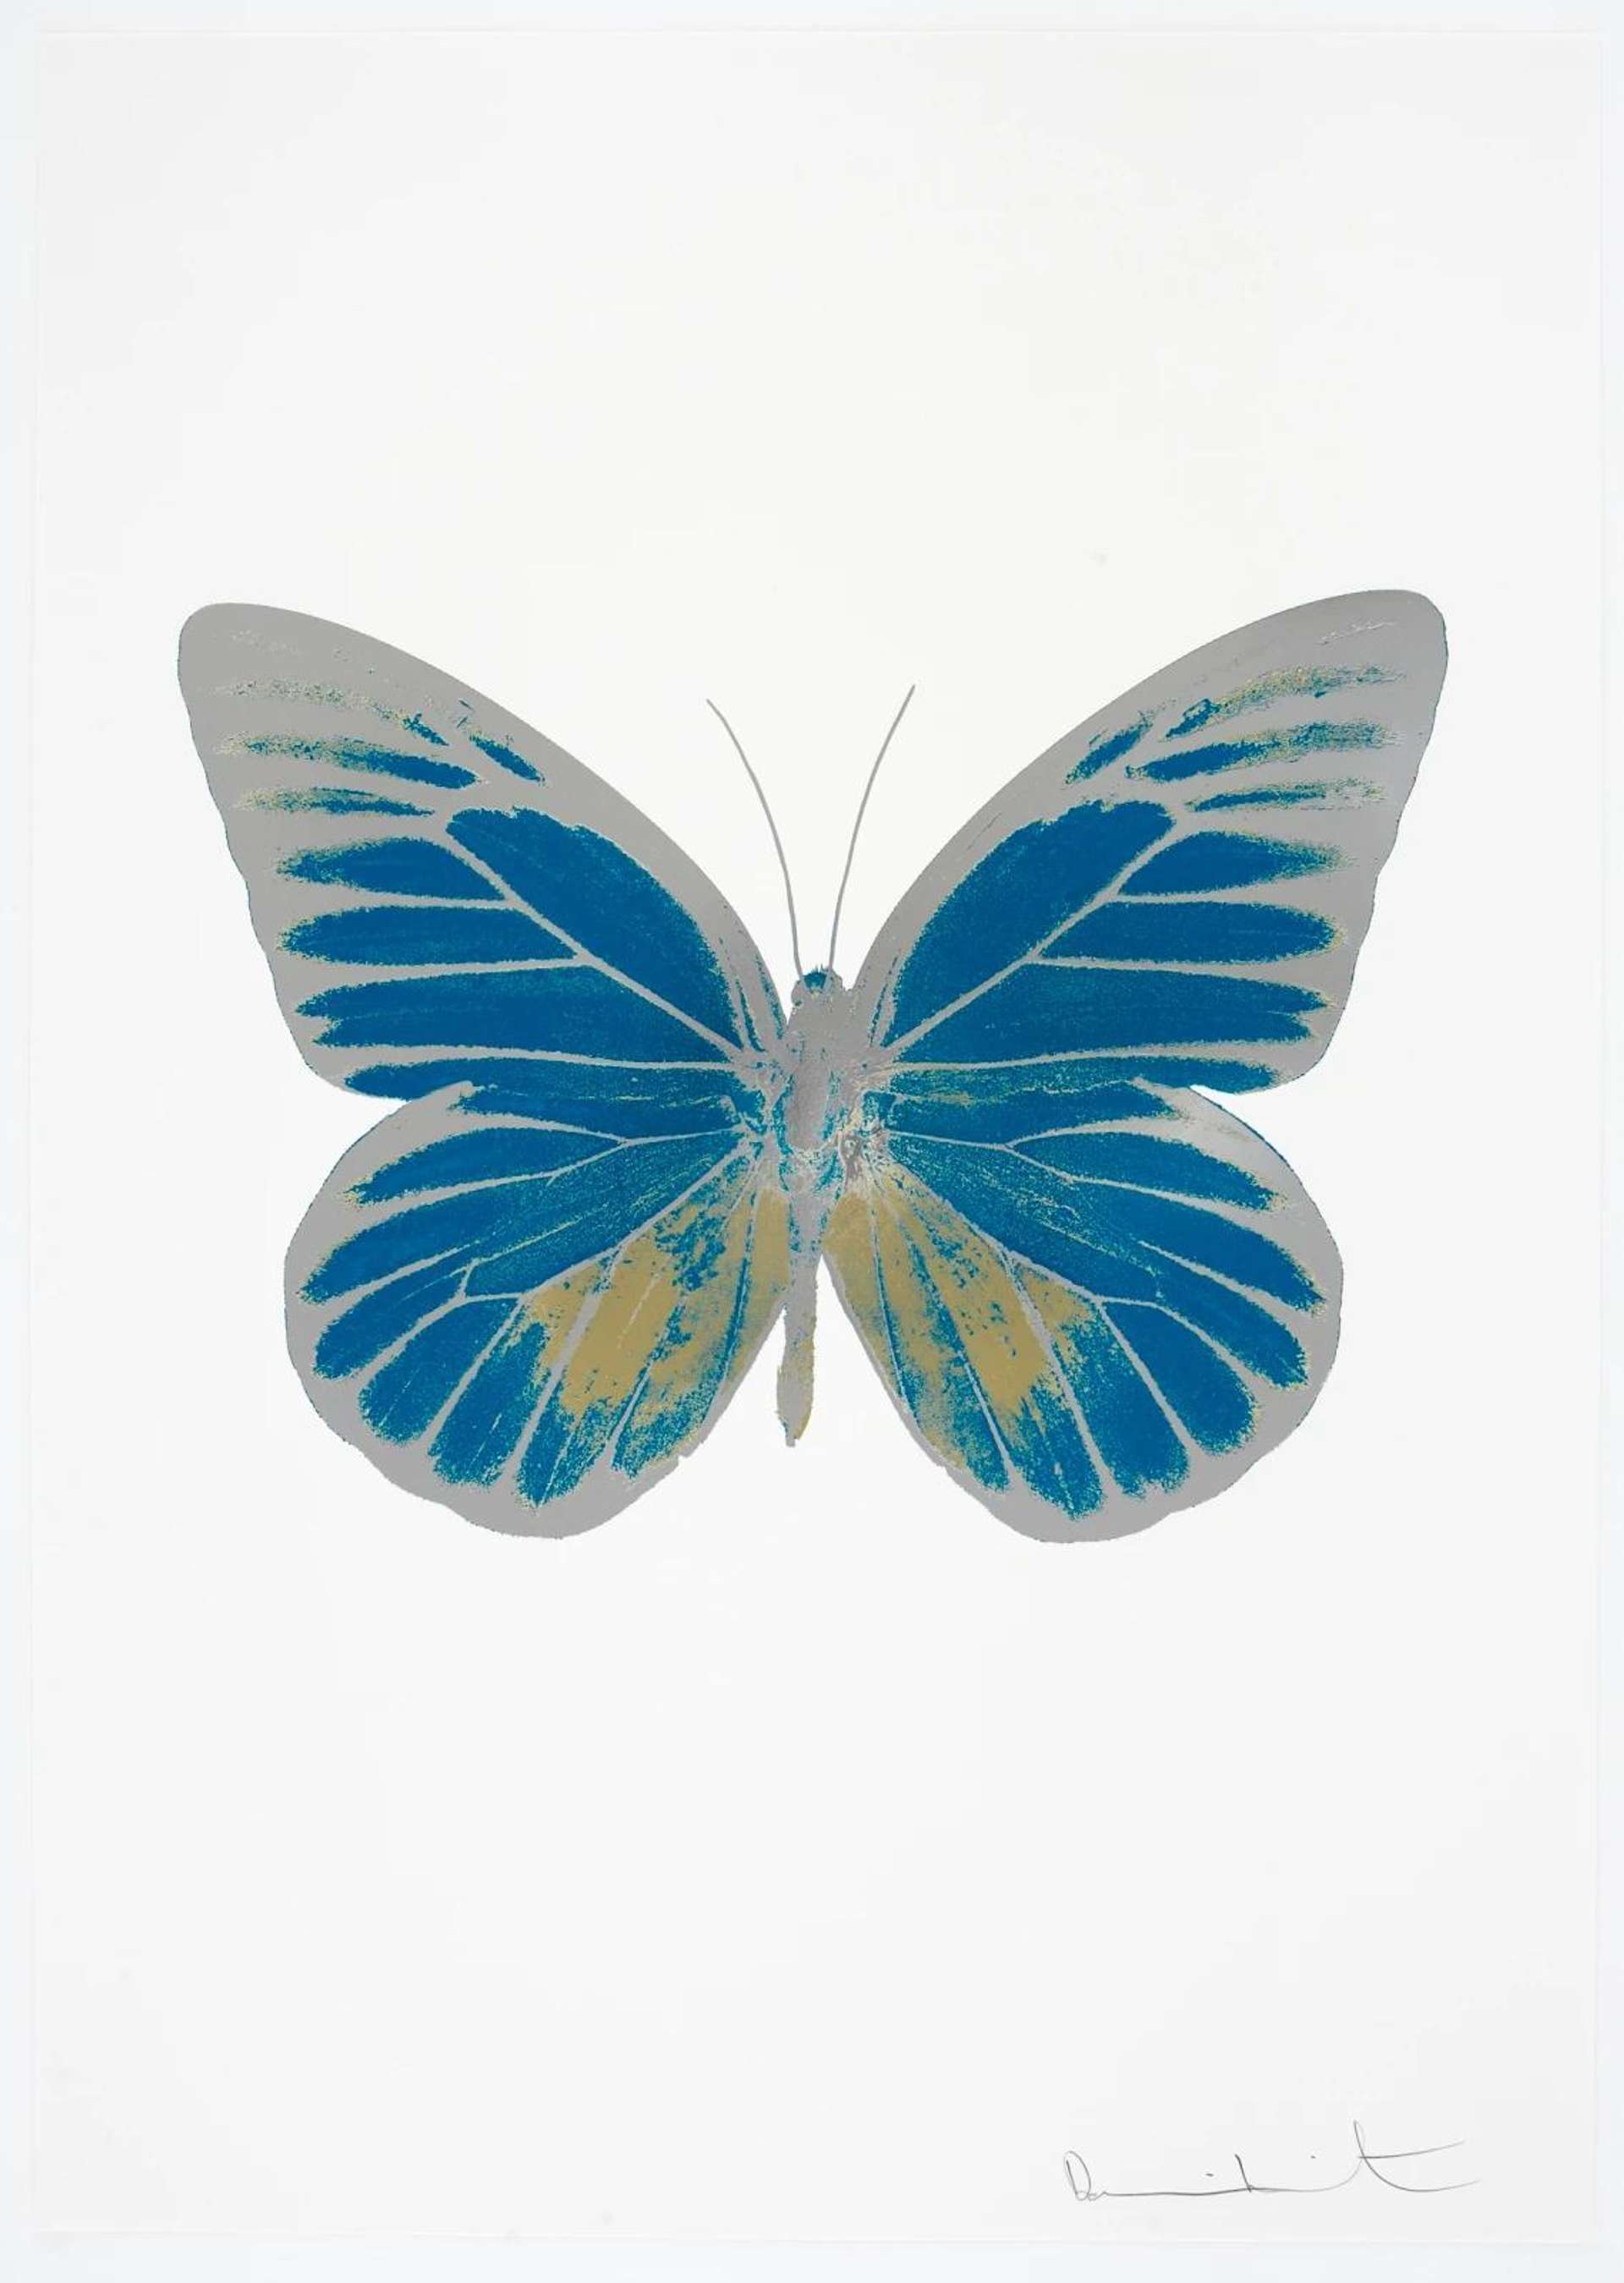 The Souls I (turquoise, cool gold, silver gloss) - Signed Print by Damien Hirst 2010 - MyArtBroker